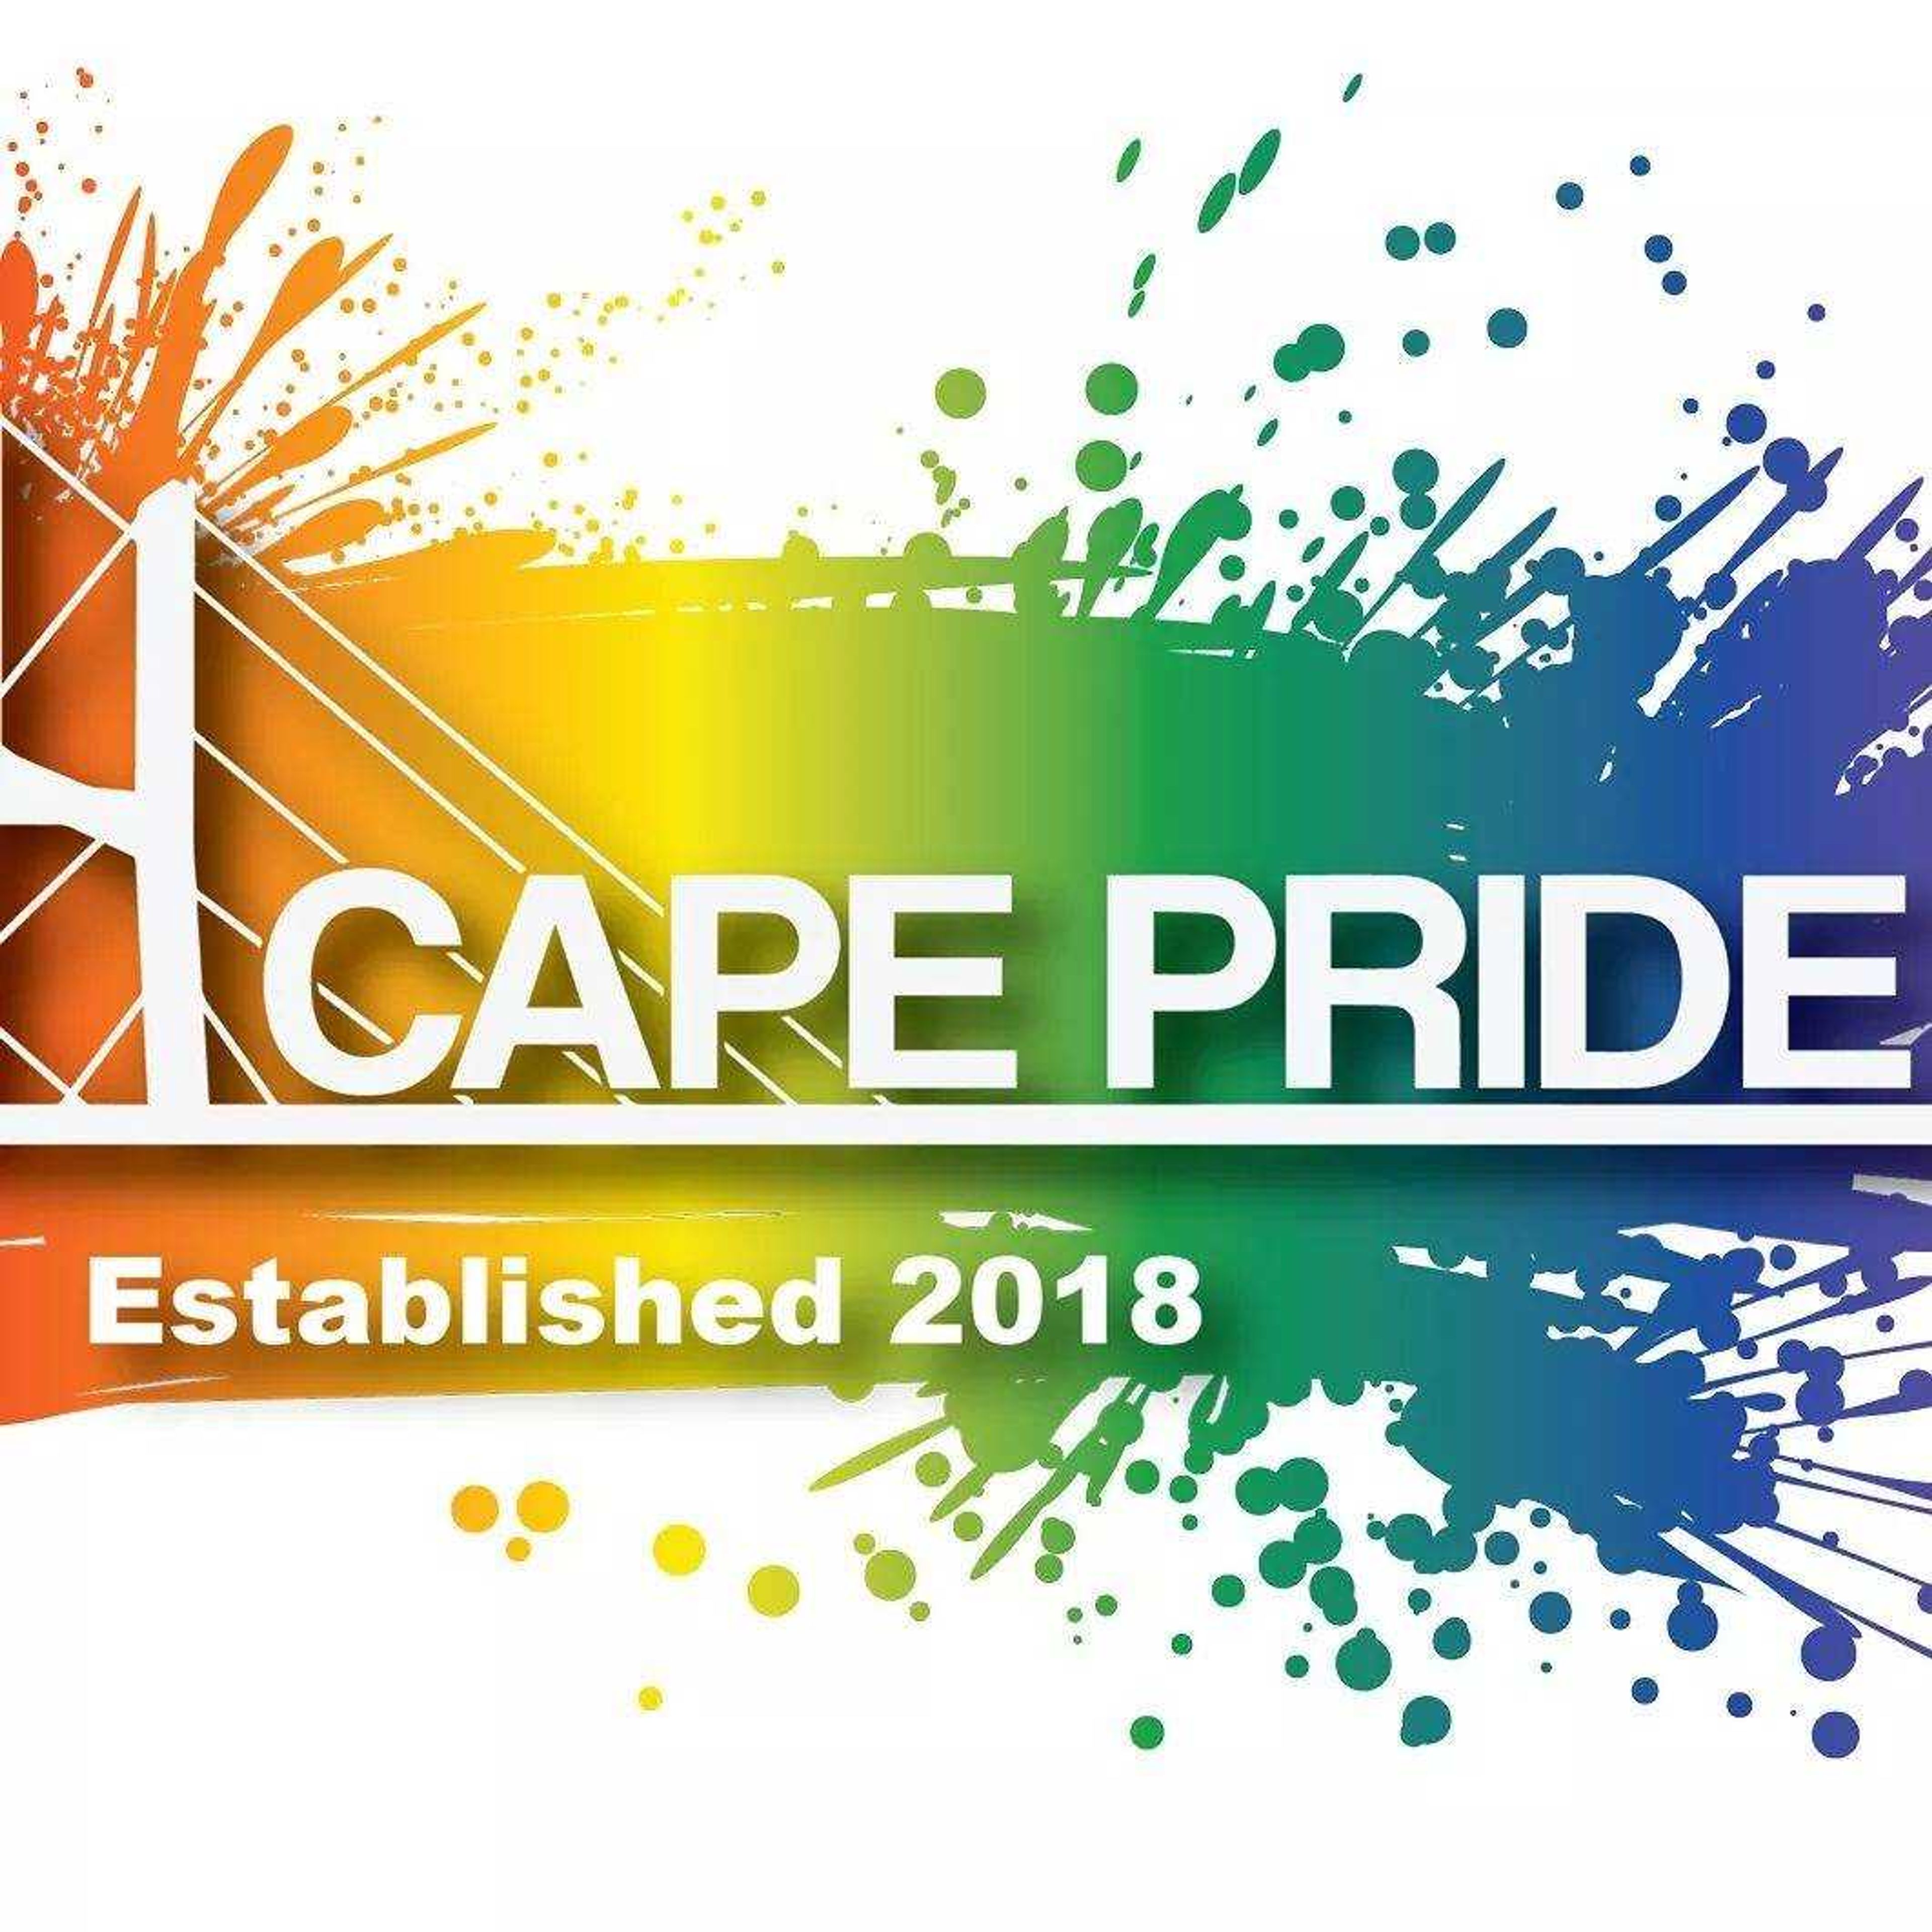 Cape PRIDE organizers decided to postpone the second annual LGBTQ+ PRIDE Festival, scheduled for May 1 and 2, in response to COVID-19.